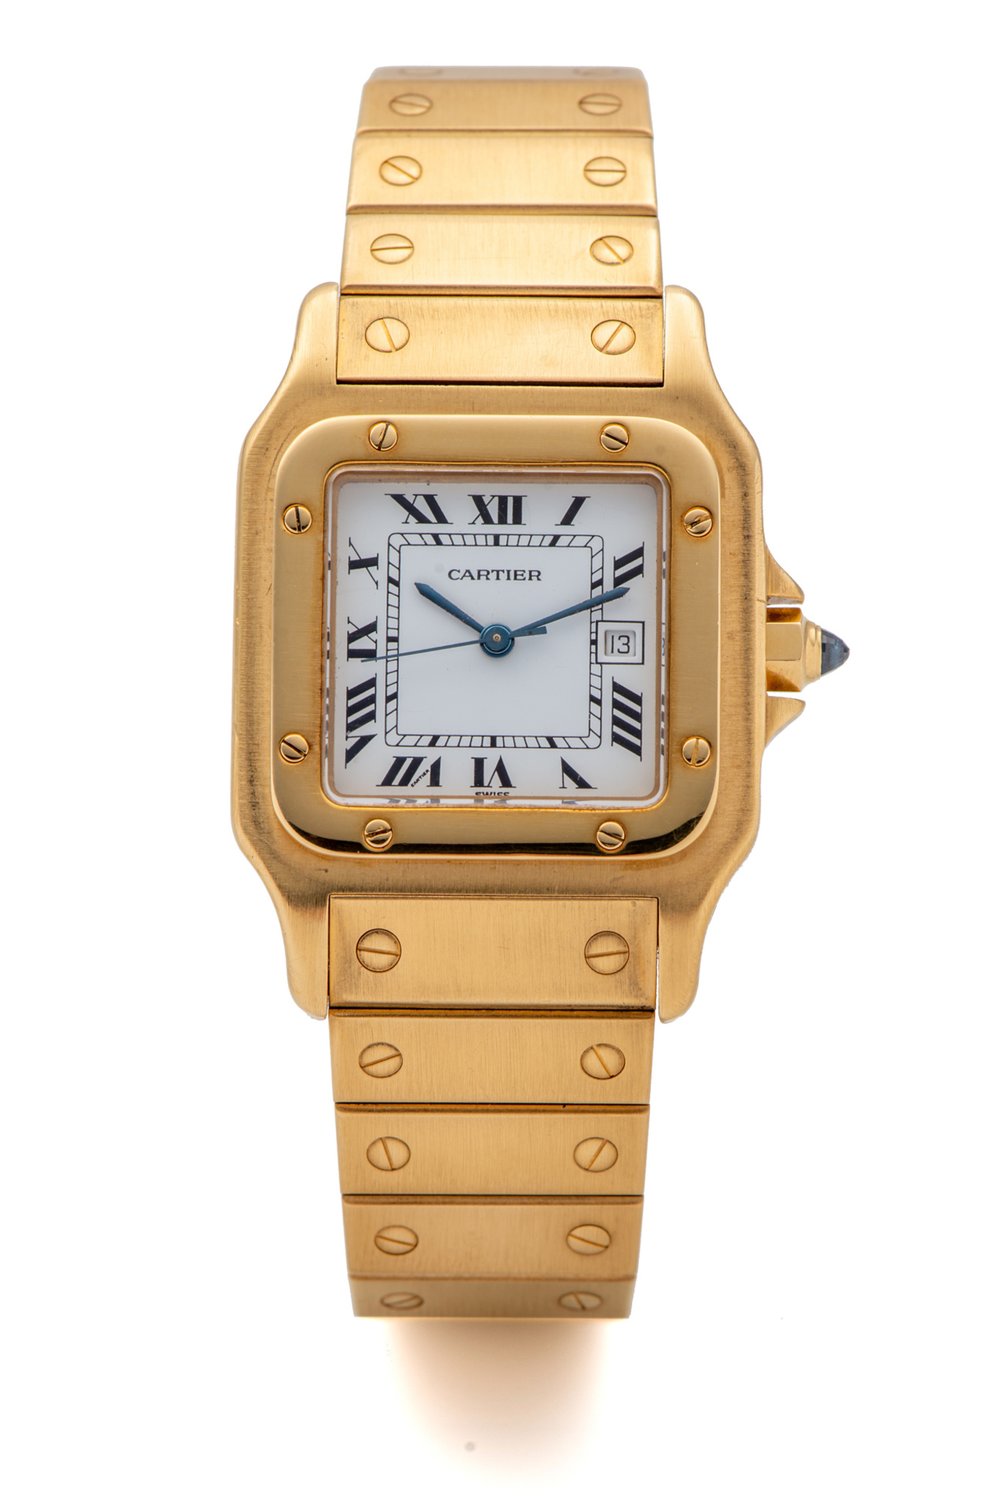 Which Cartier watches hold their value?